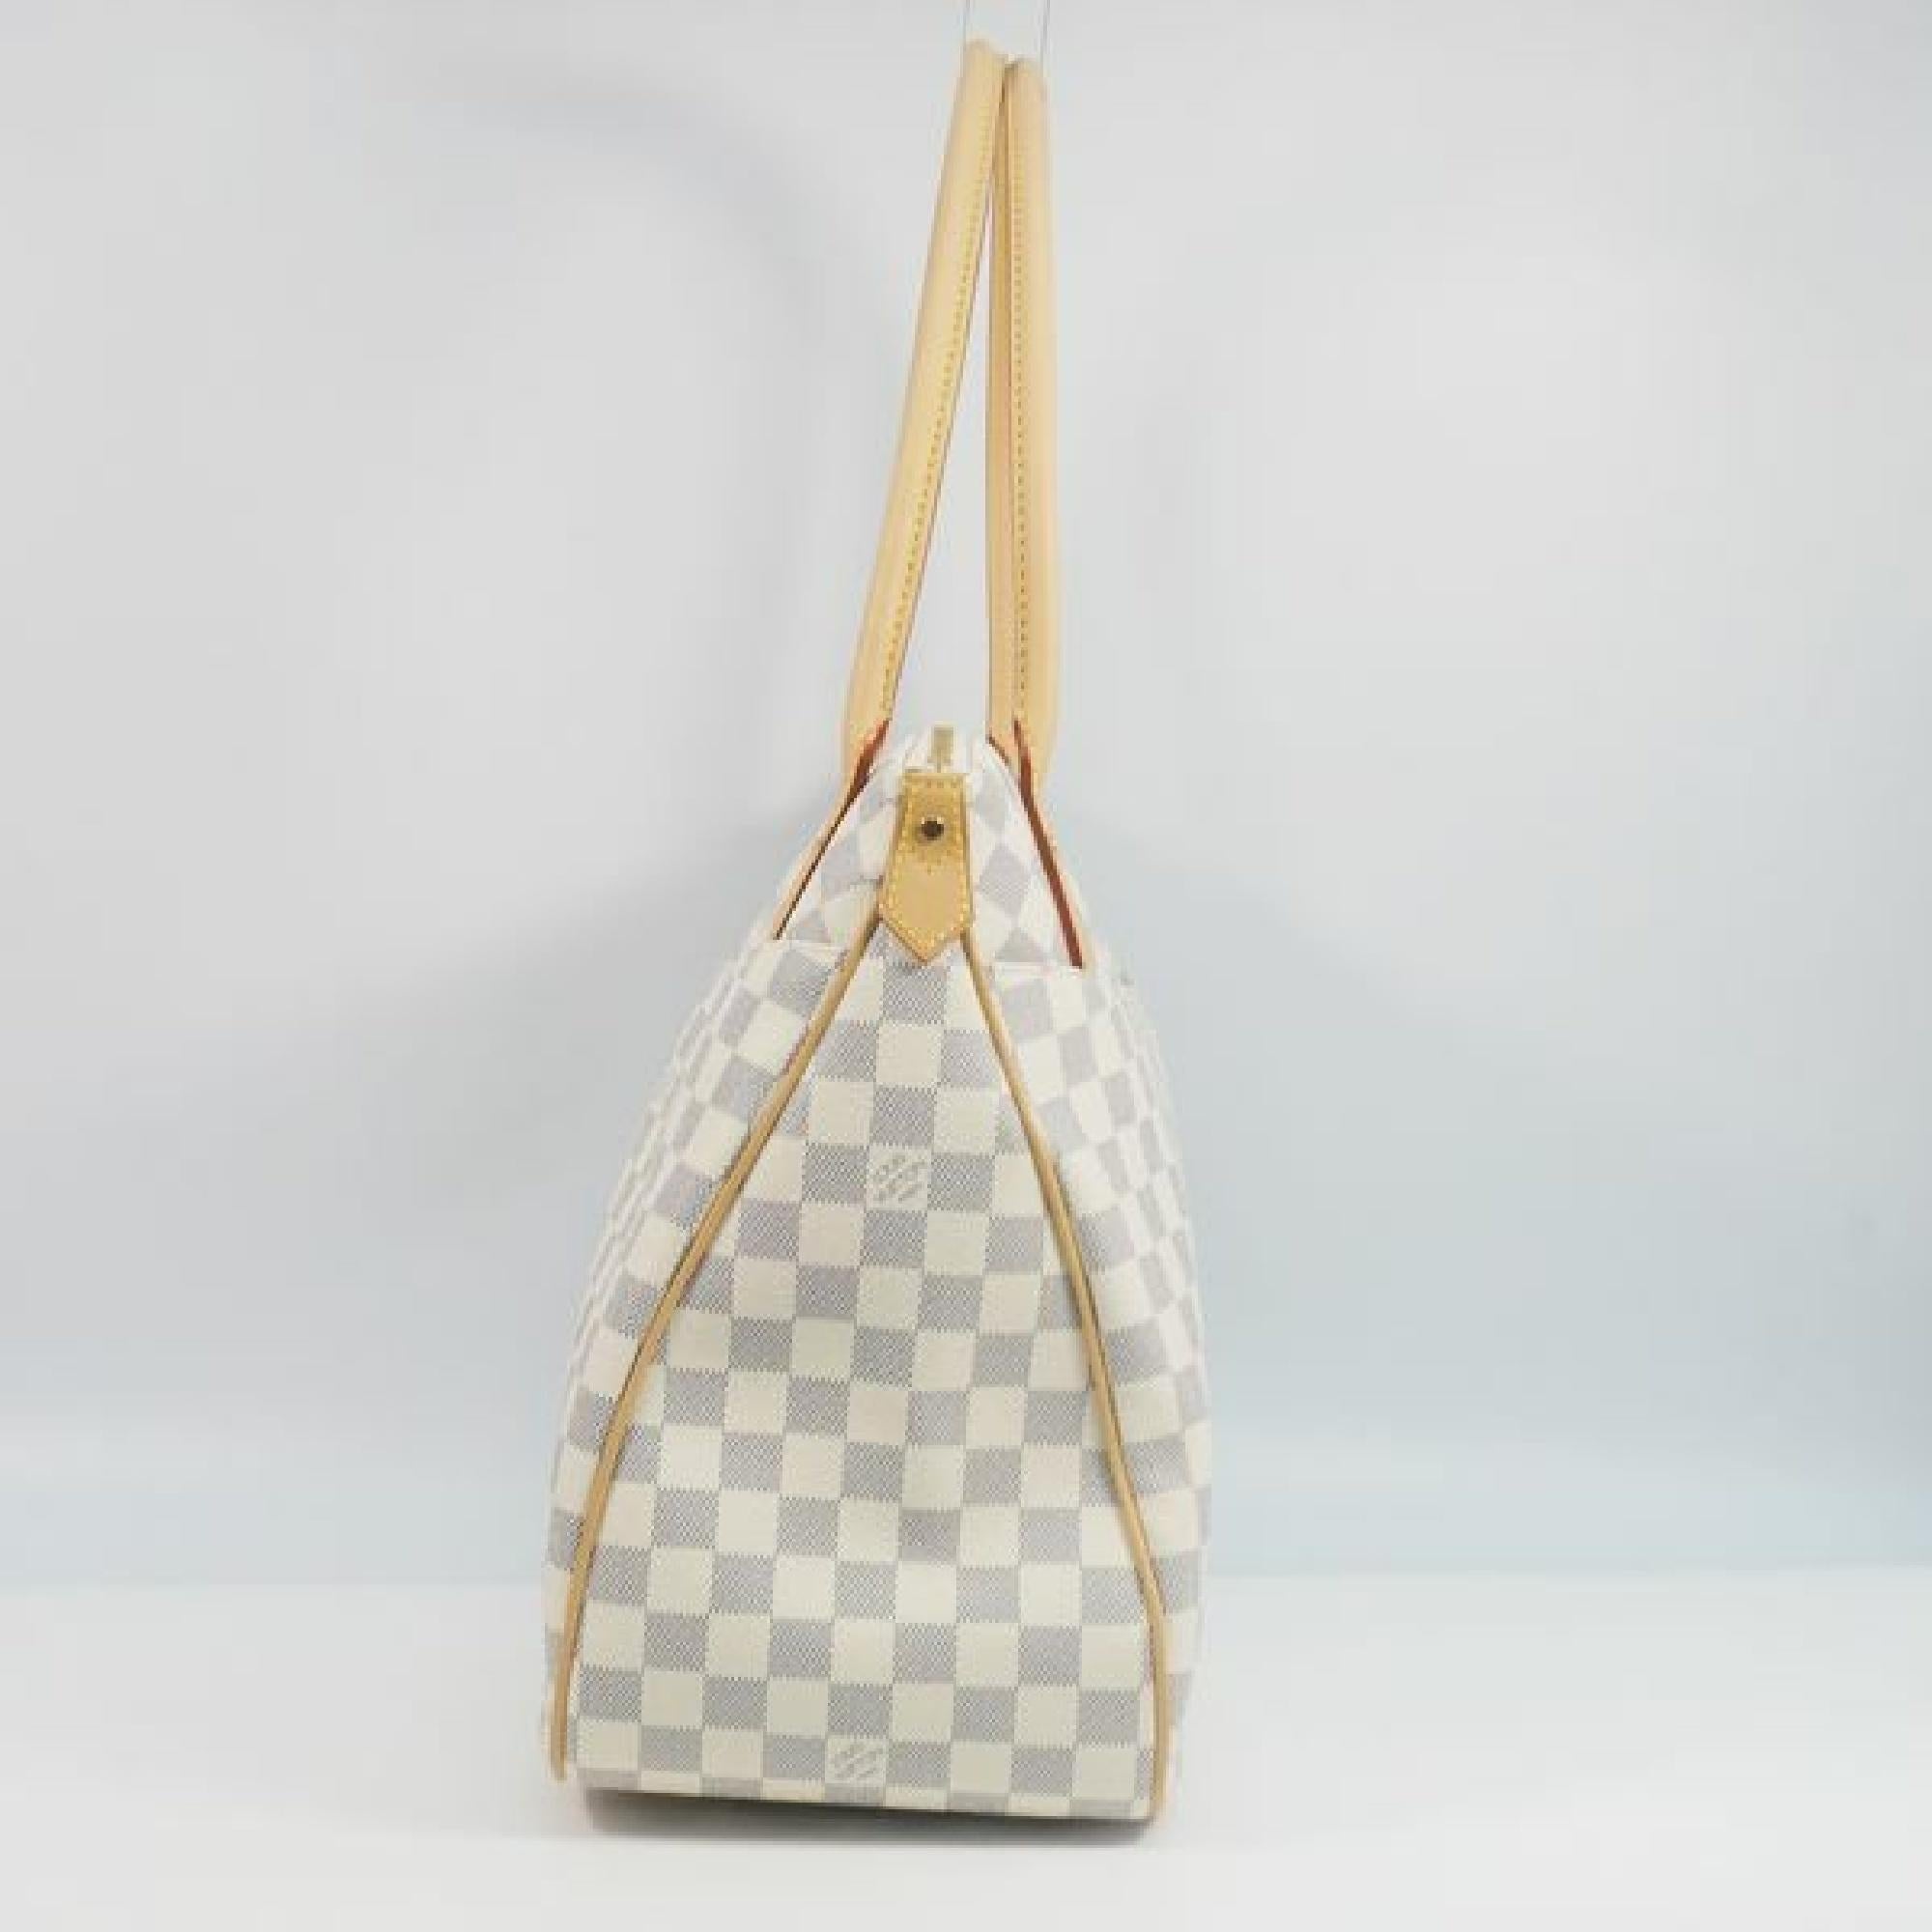 An authentic LOUIS VUITTON Figheri GM Womens tote bag N41175 The outside material is Damier Azur canvas. The pattern is FigheriGM. This item is Contemporary. The year of manufacture would be 2011.
Rank
A beautiful goods
Used items with little bit